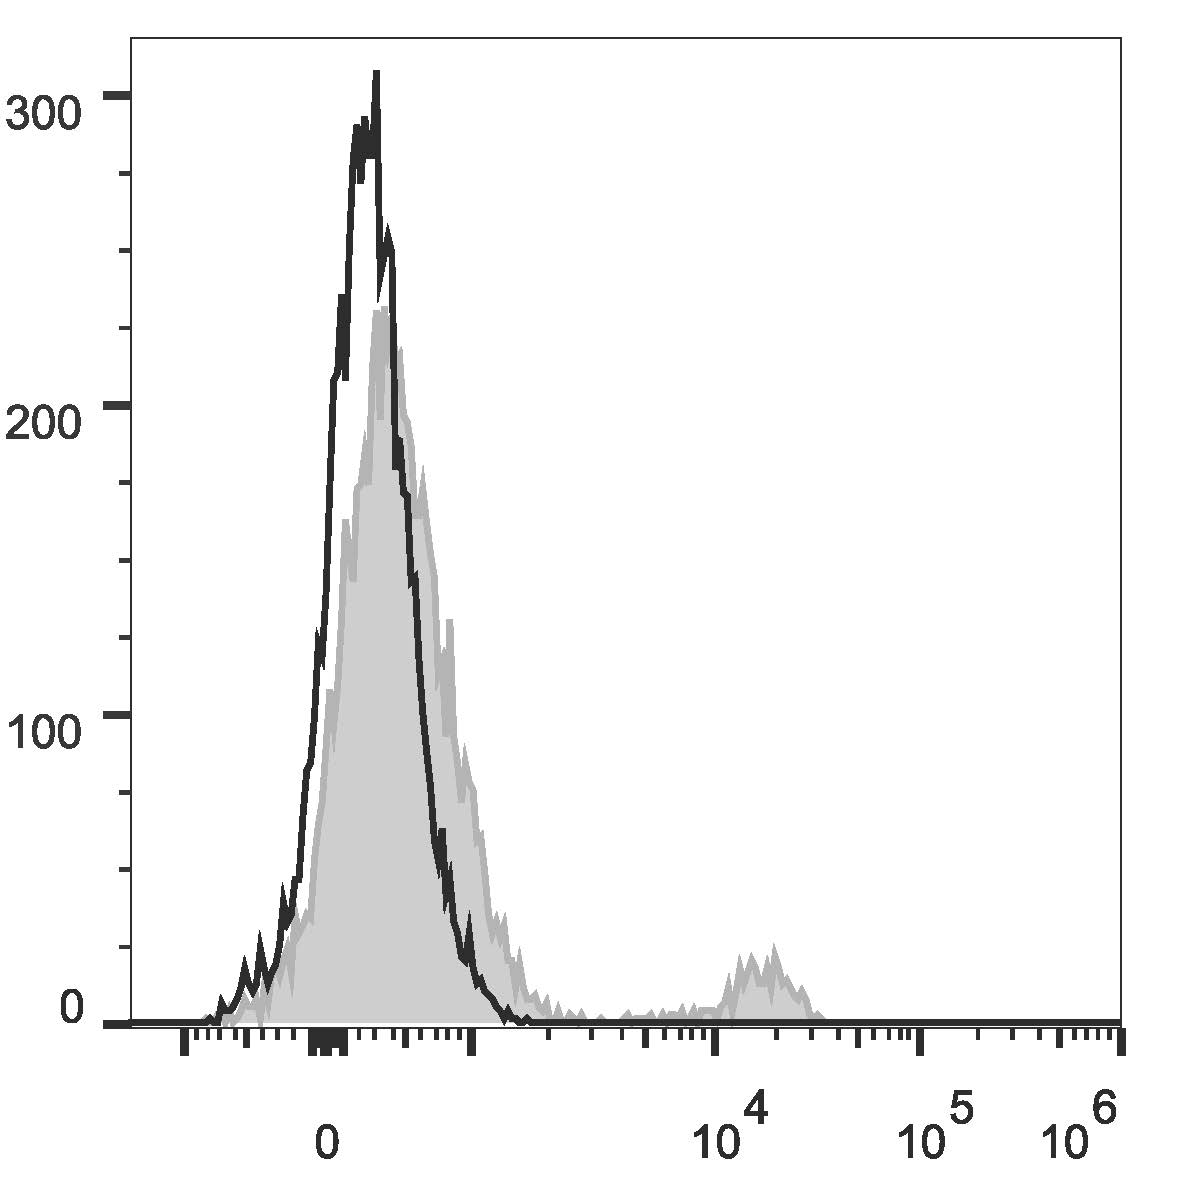 Human peripheral blood lymphocytes are stained with Anti-Human CD40 Monoclonal Antibody(PerCP/Cyanine5.5 Conjugated)(filled gray histogram). Unstained lymphocytes (empty black histogram) are used as control.